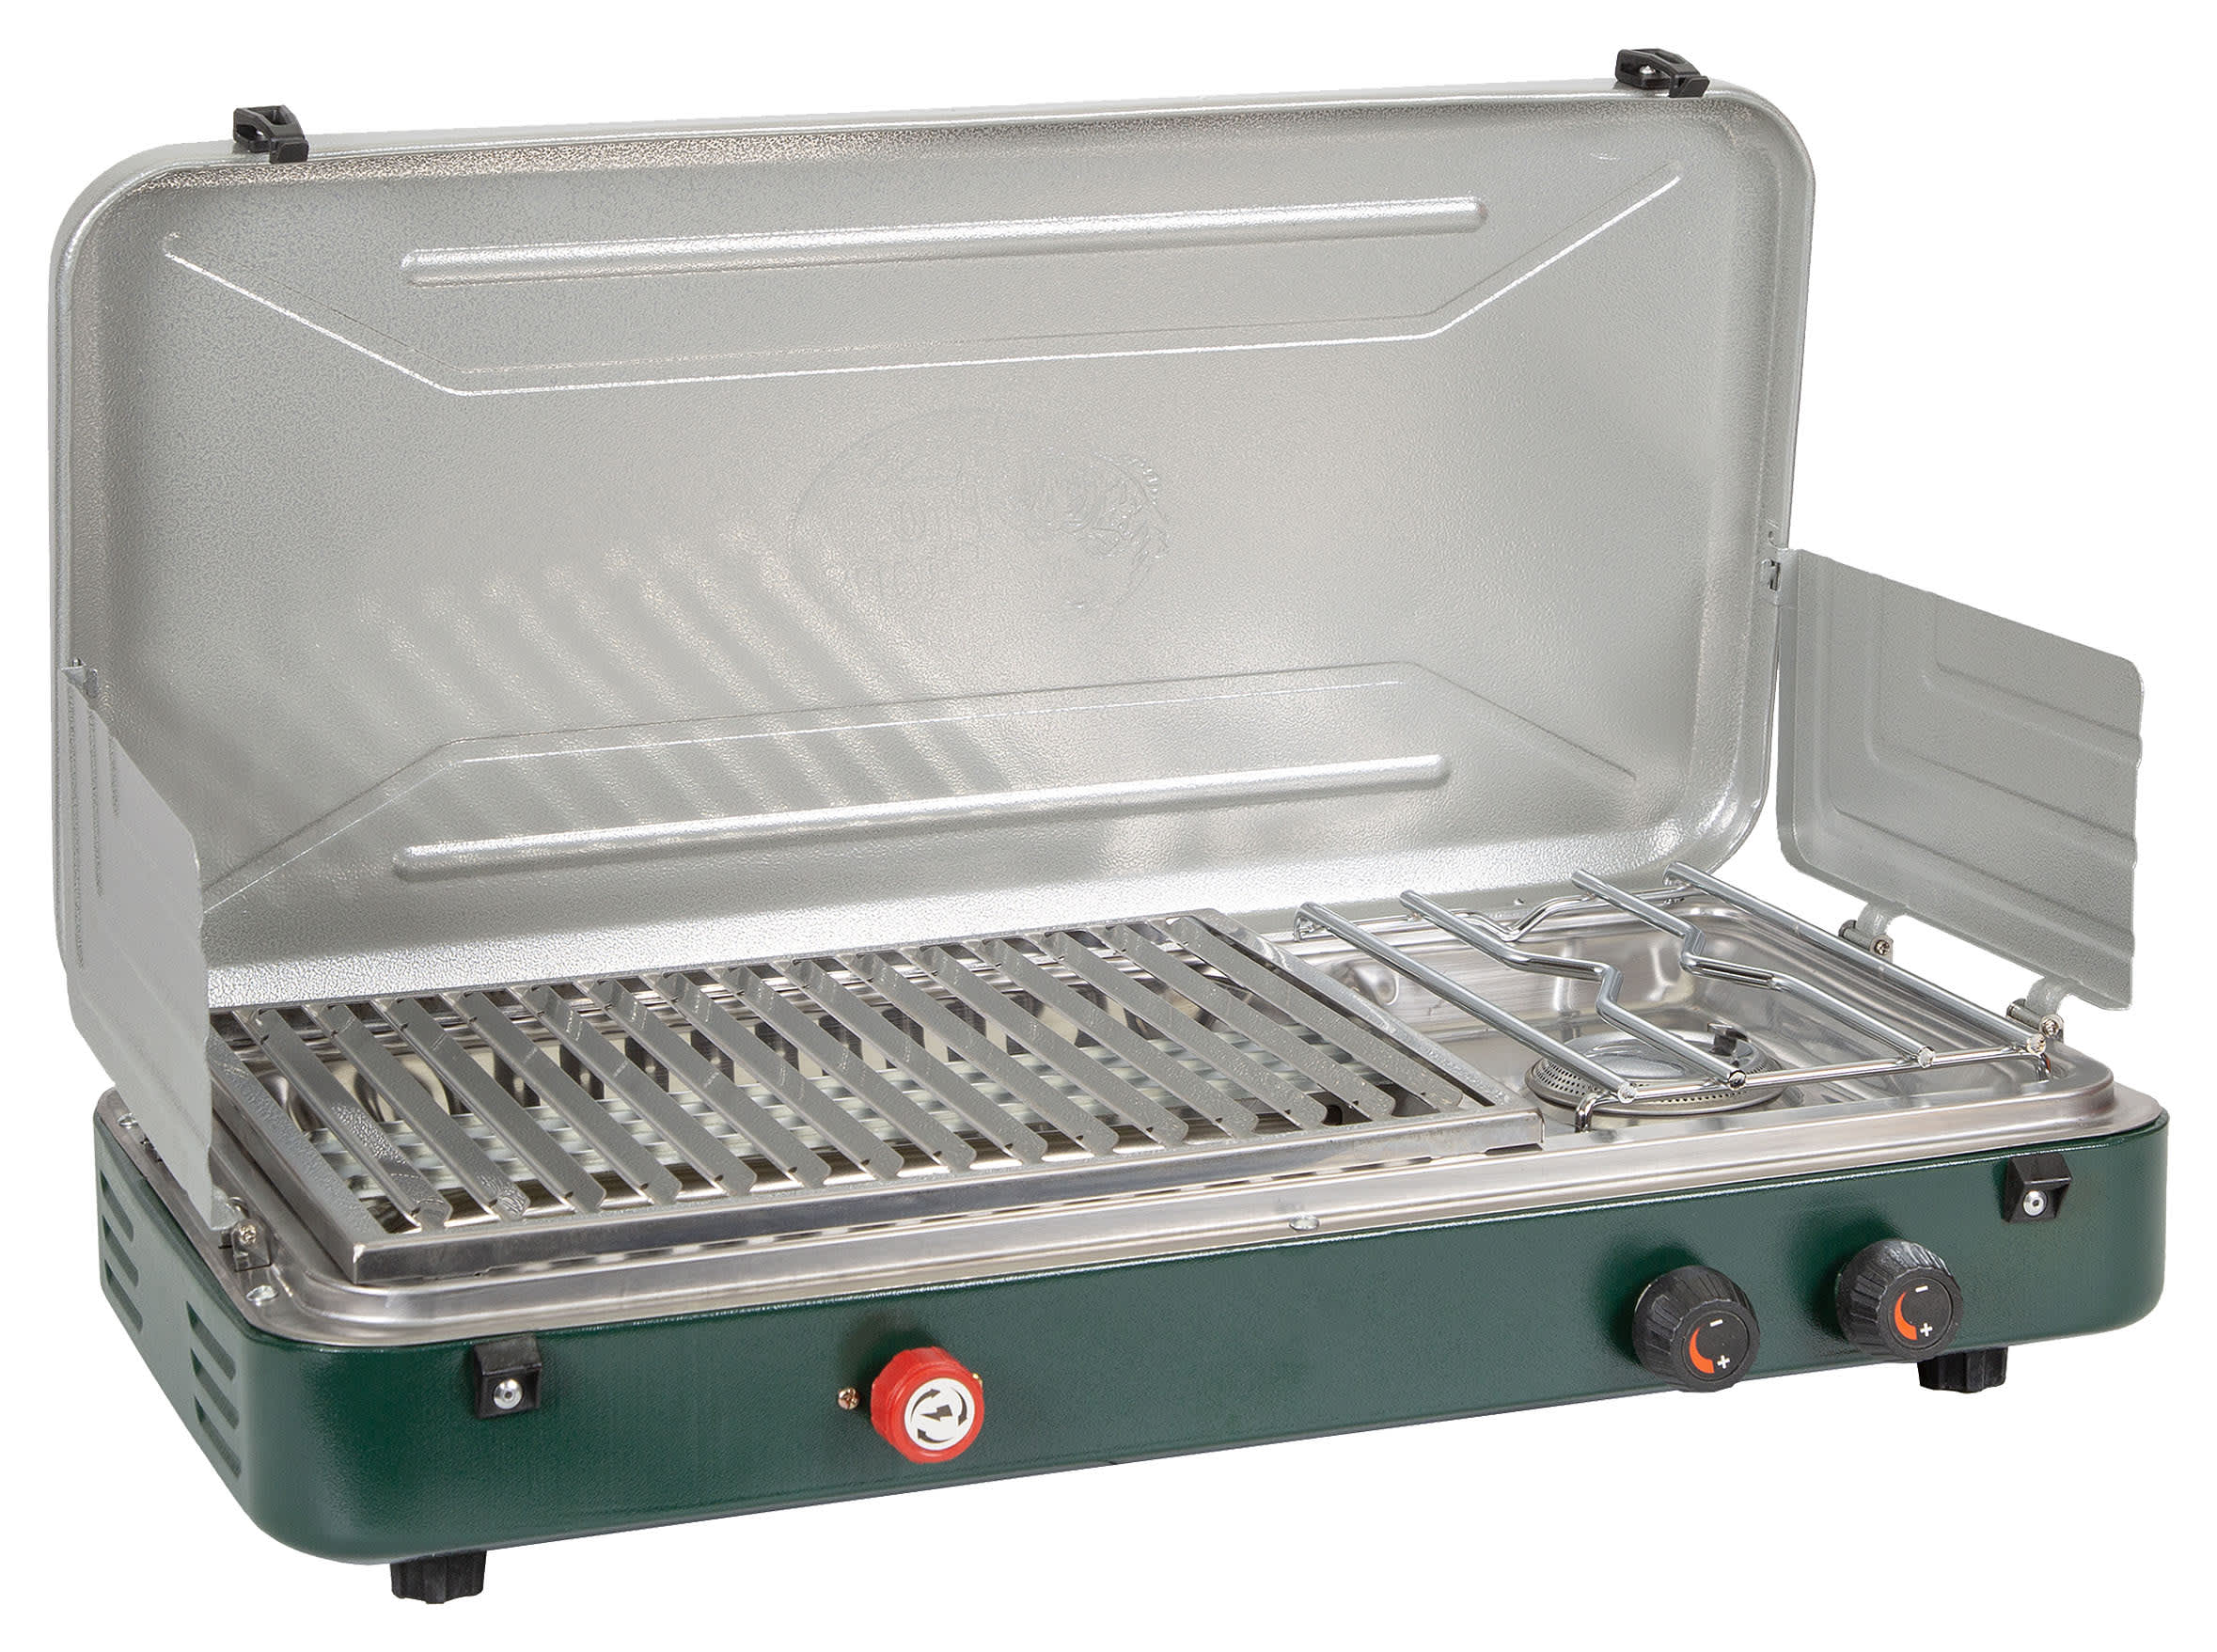 Bass Pro Shops® High Output Propane Grill and Stove